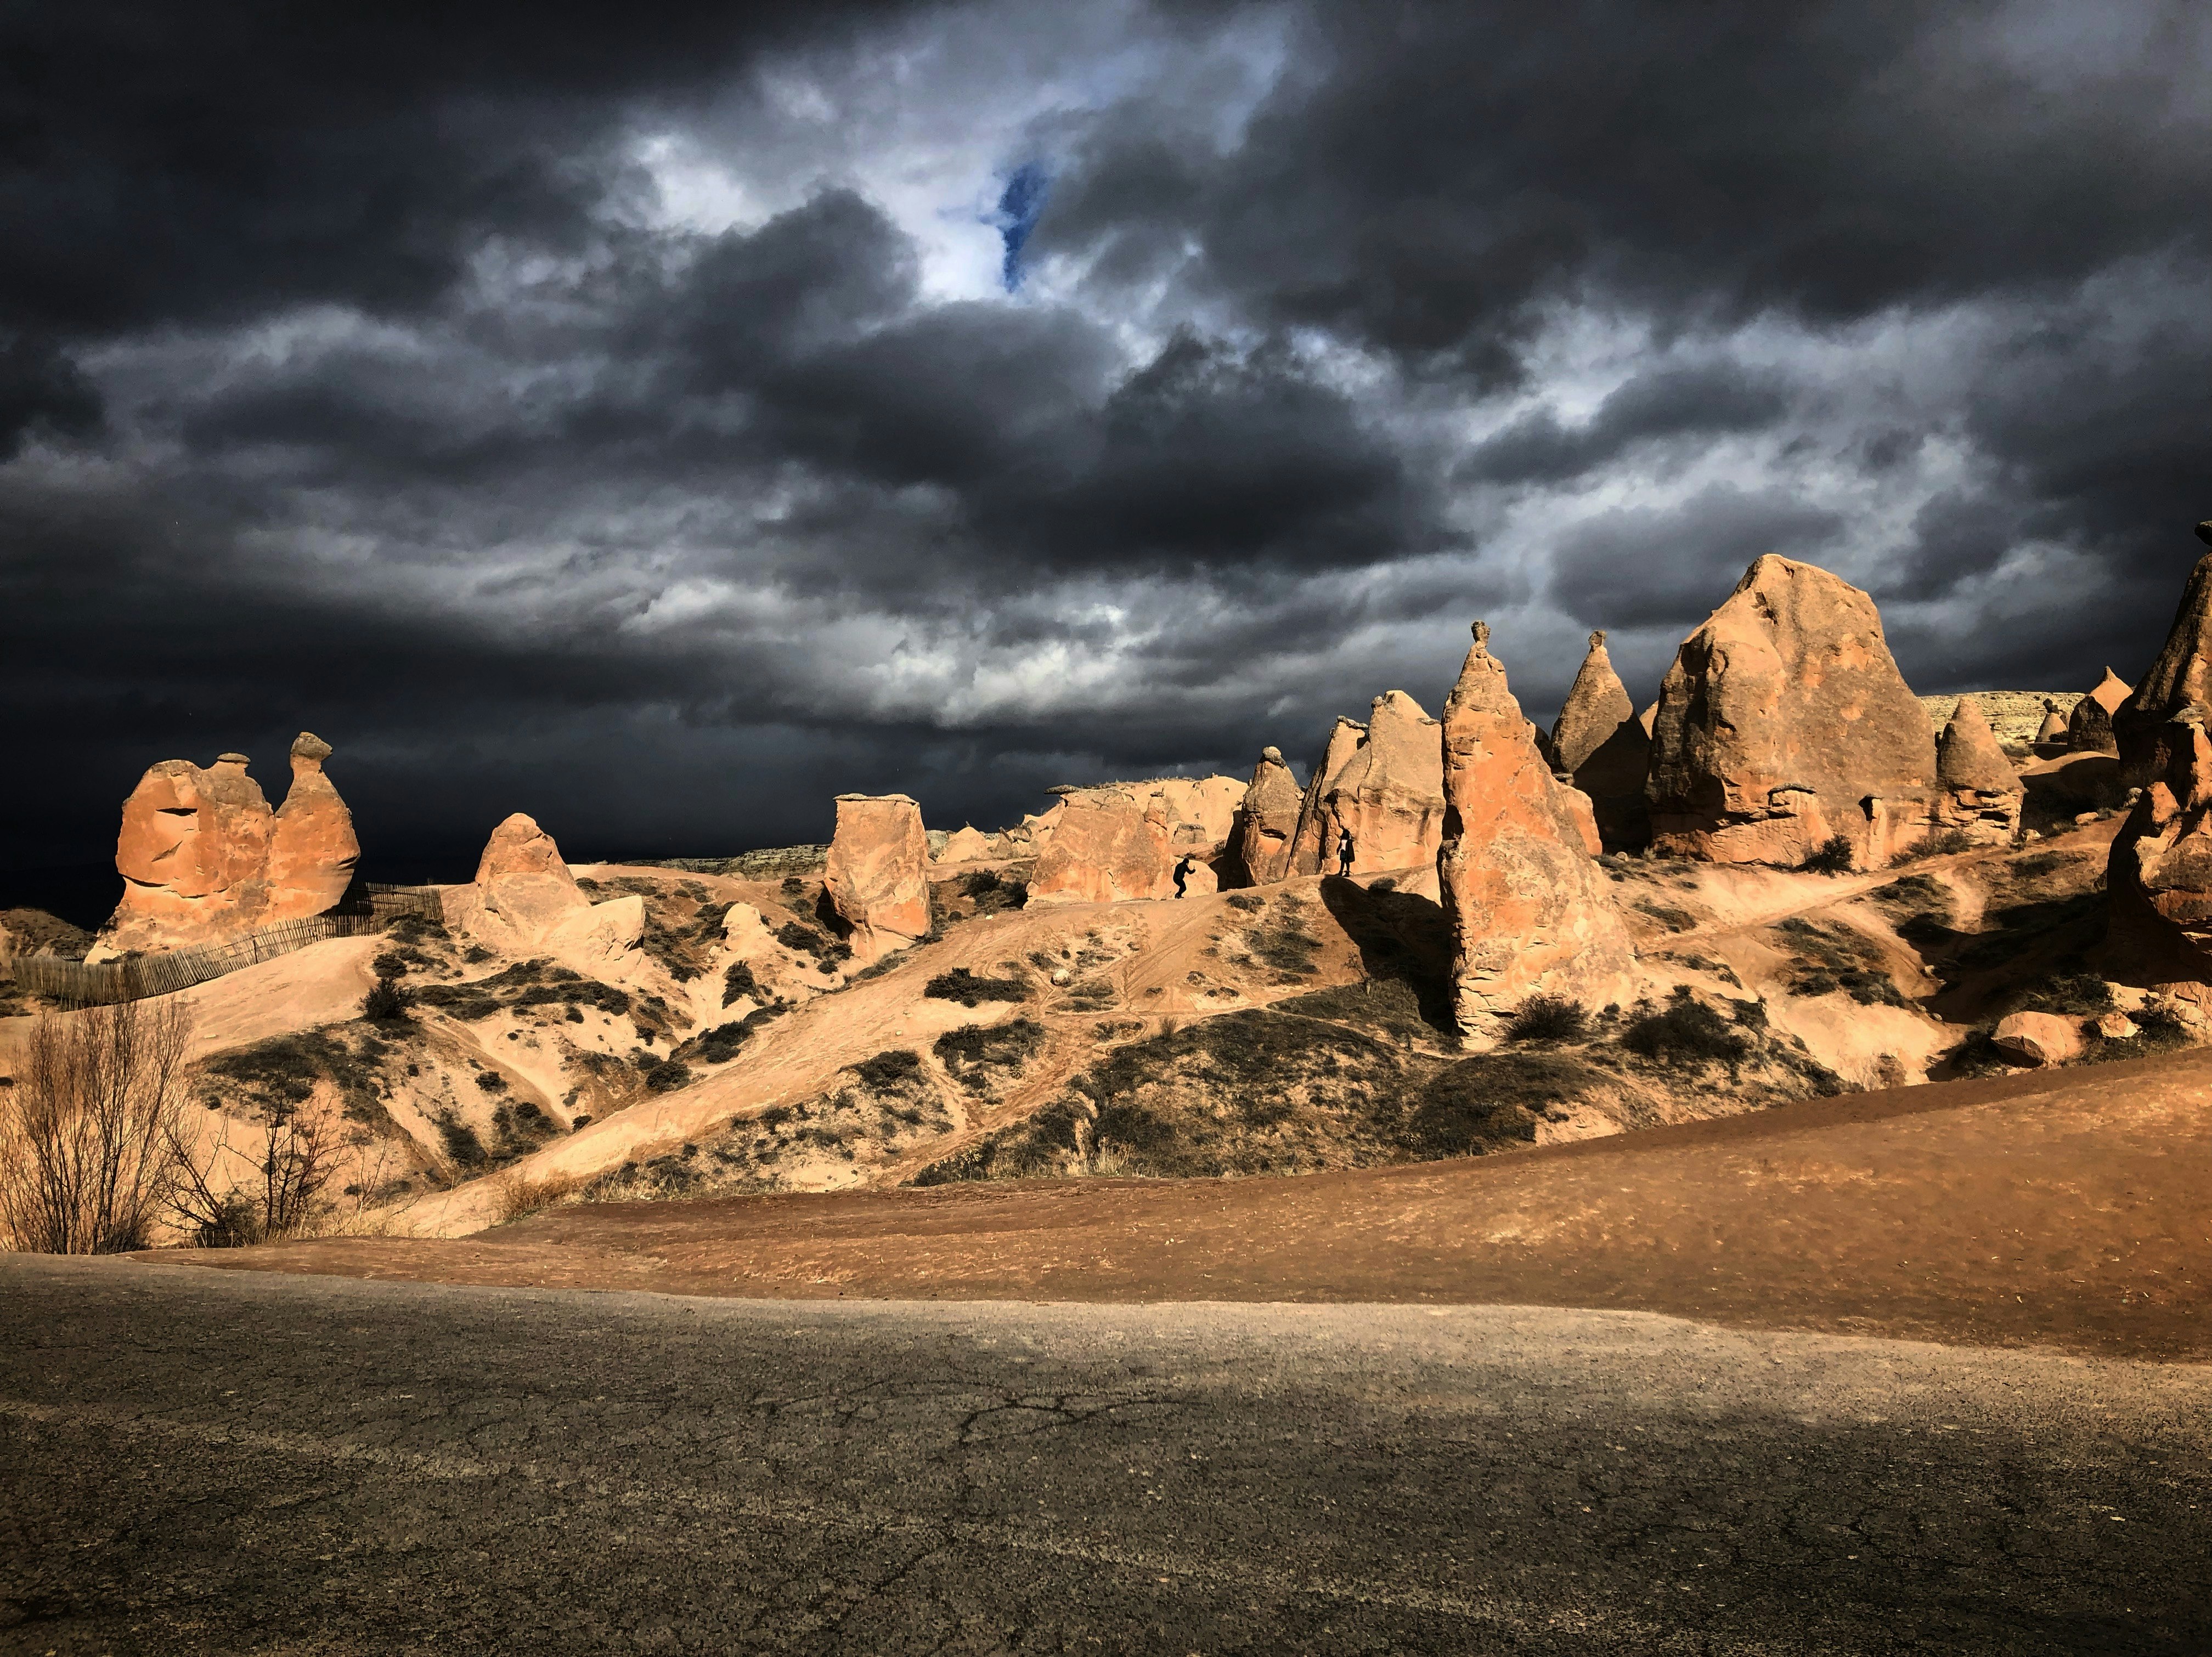 brown rock formation under cloudy sky during daytime